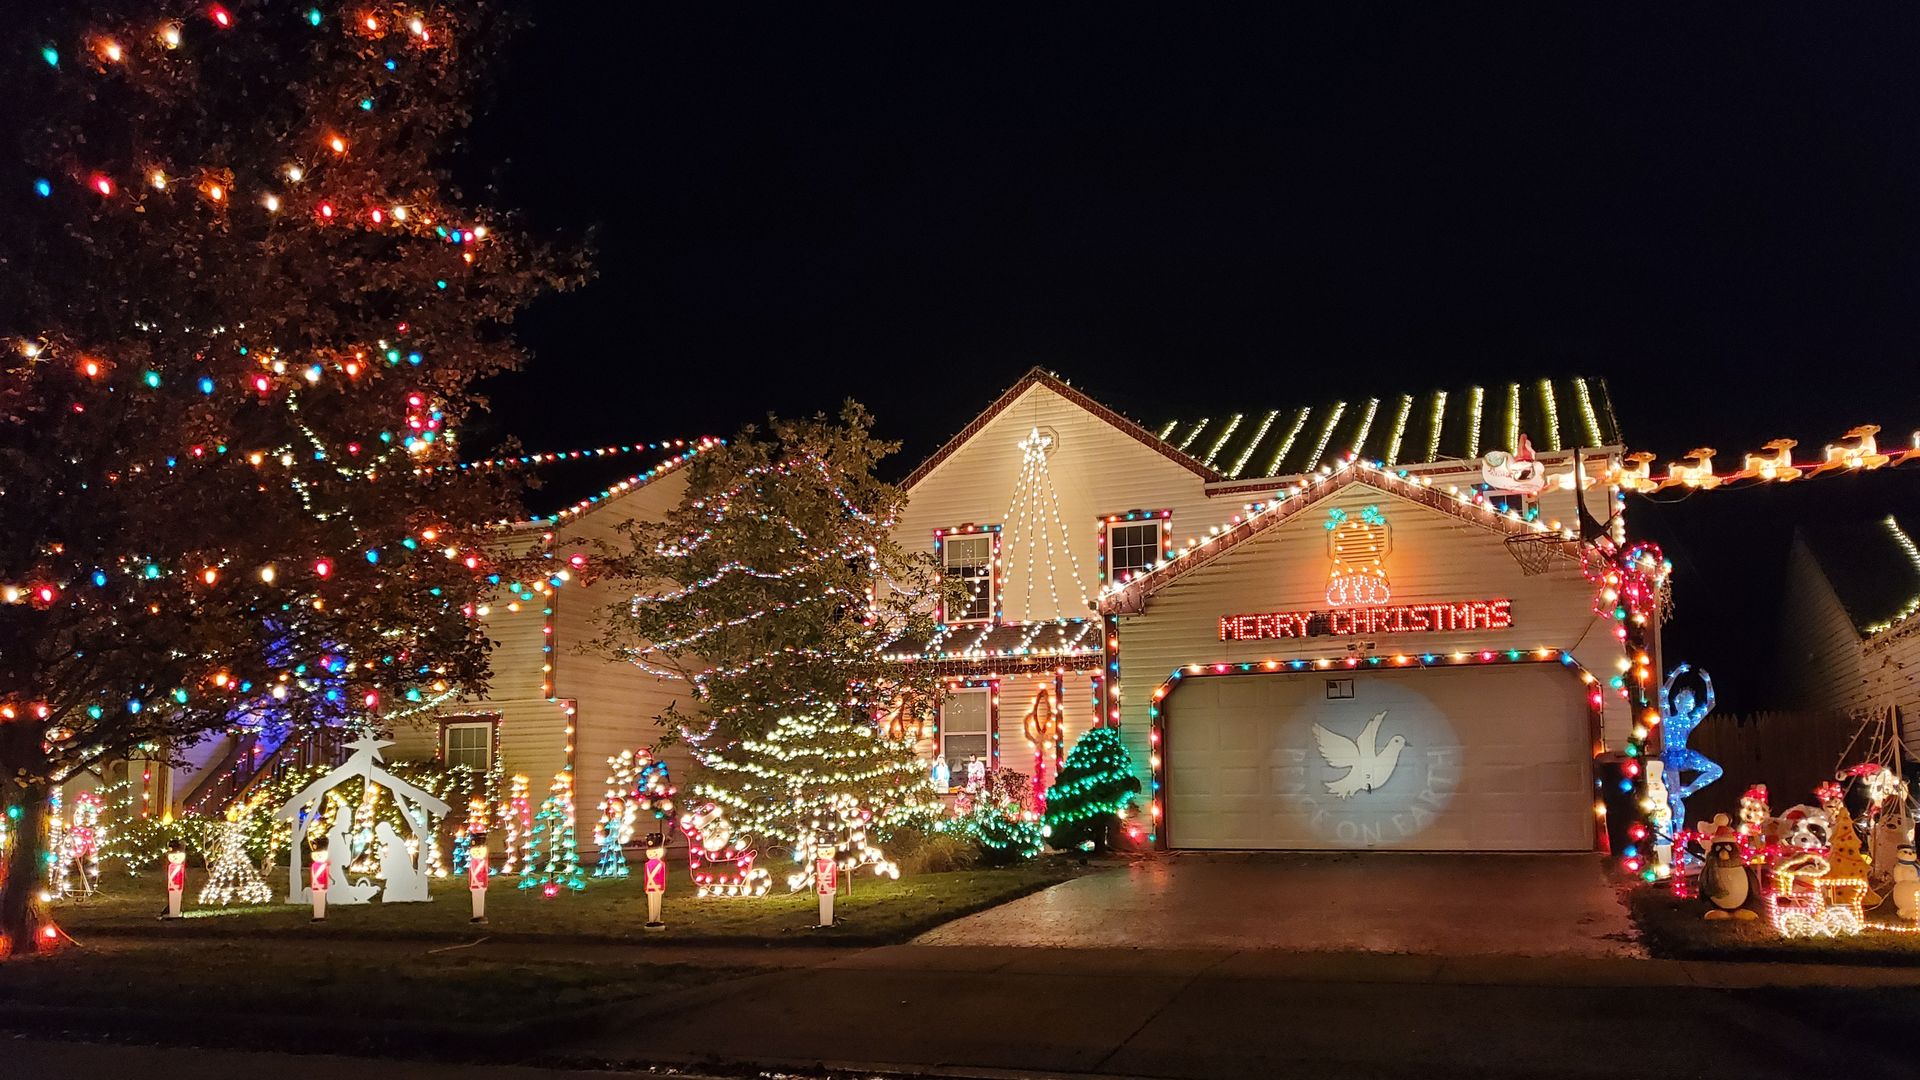 A house's holiday light display.